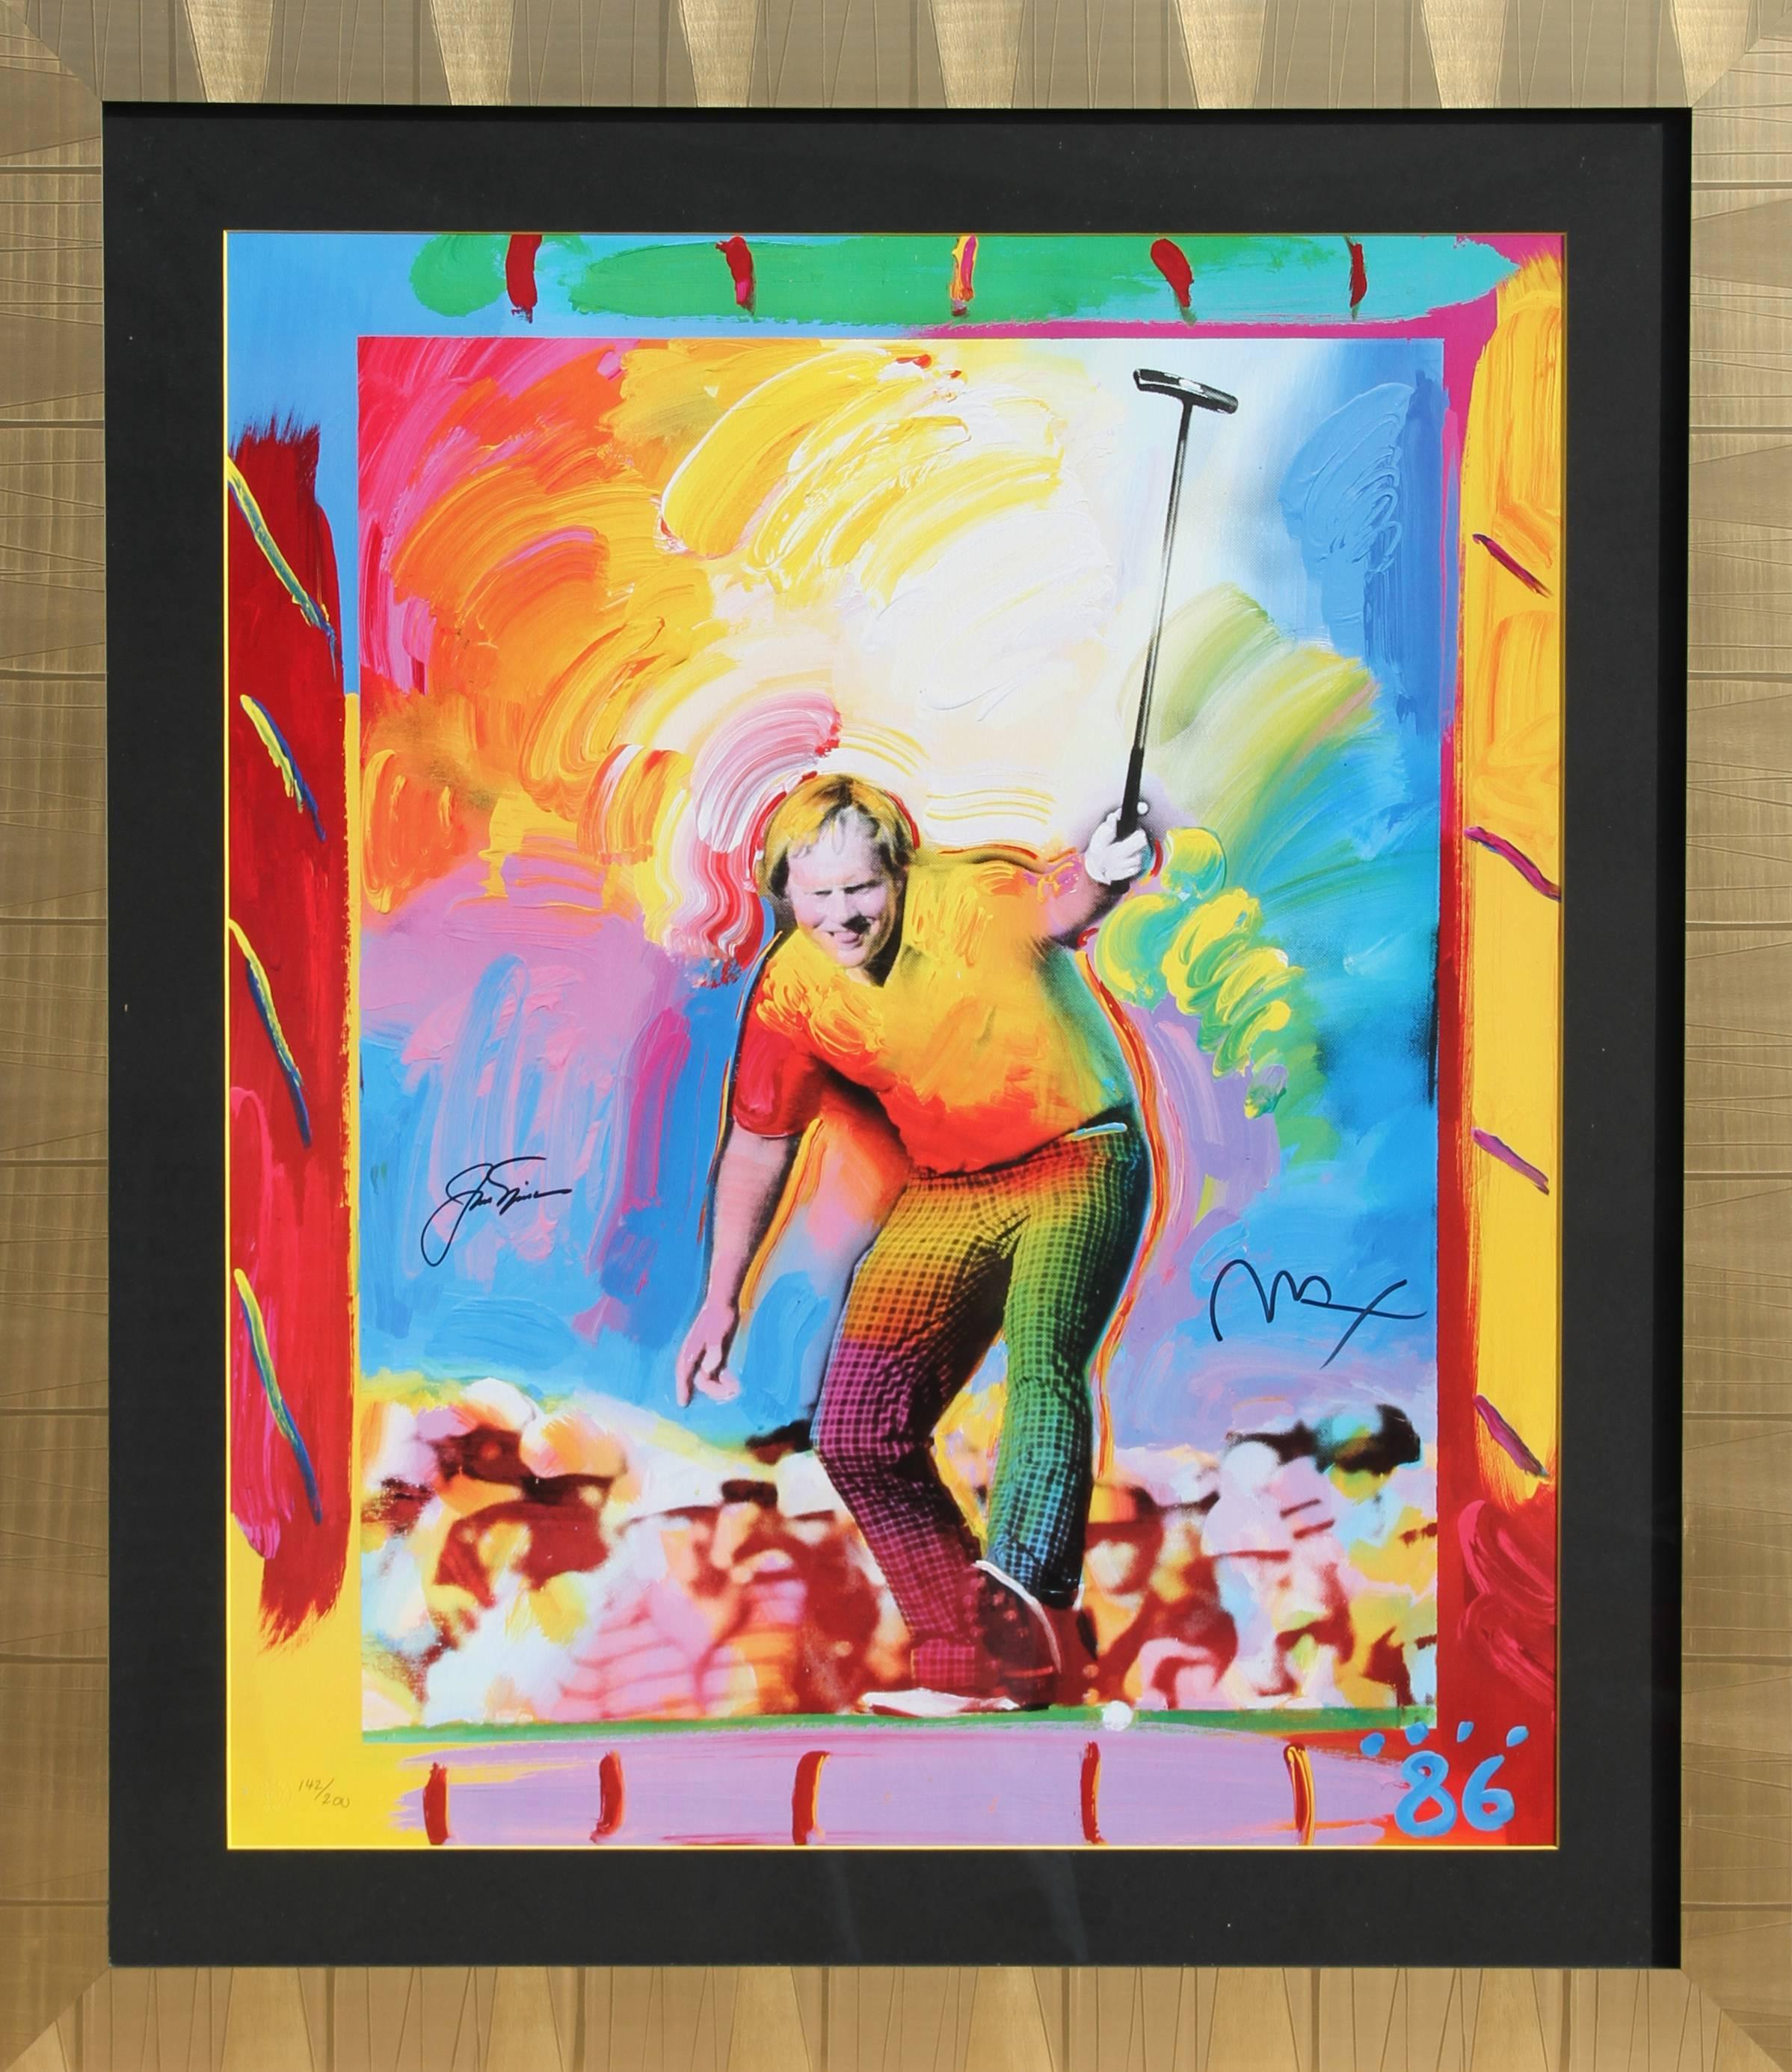 Jack Nicklaus, Pop Art Lithograph by Peter Max